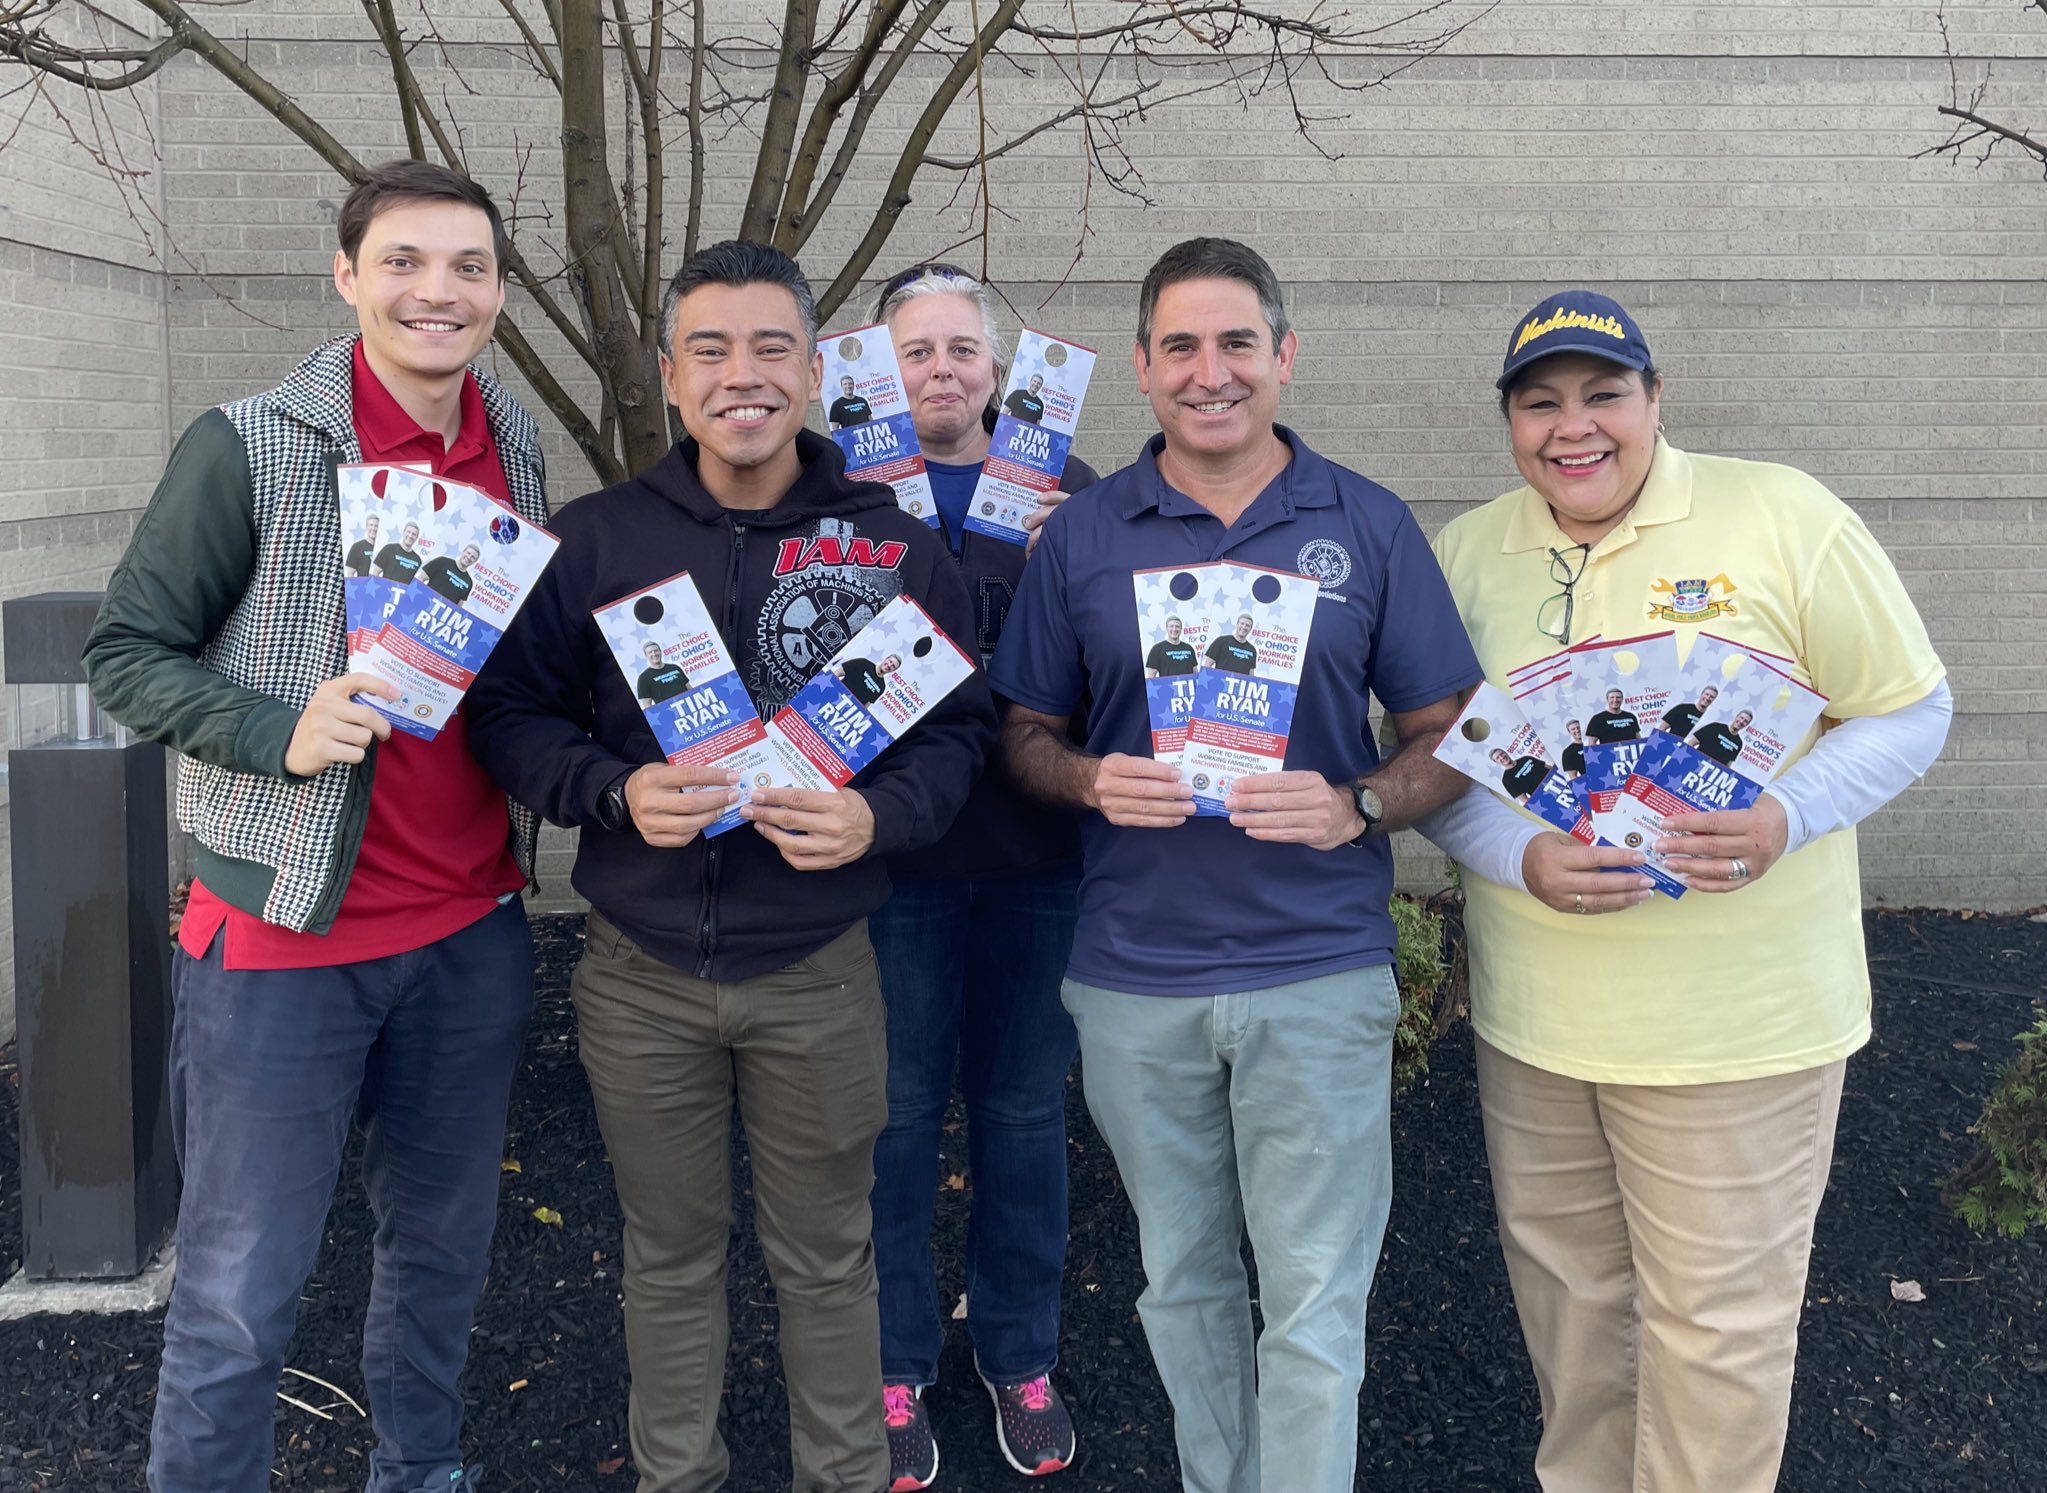 Machinists on the Ground, Getting Out the Vote for Pro-Labor Midterm Election Candidates